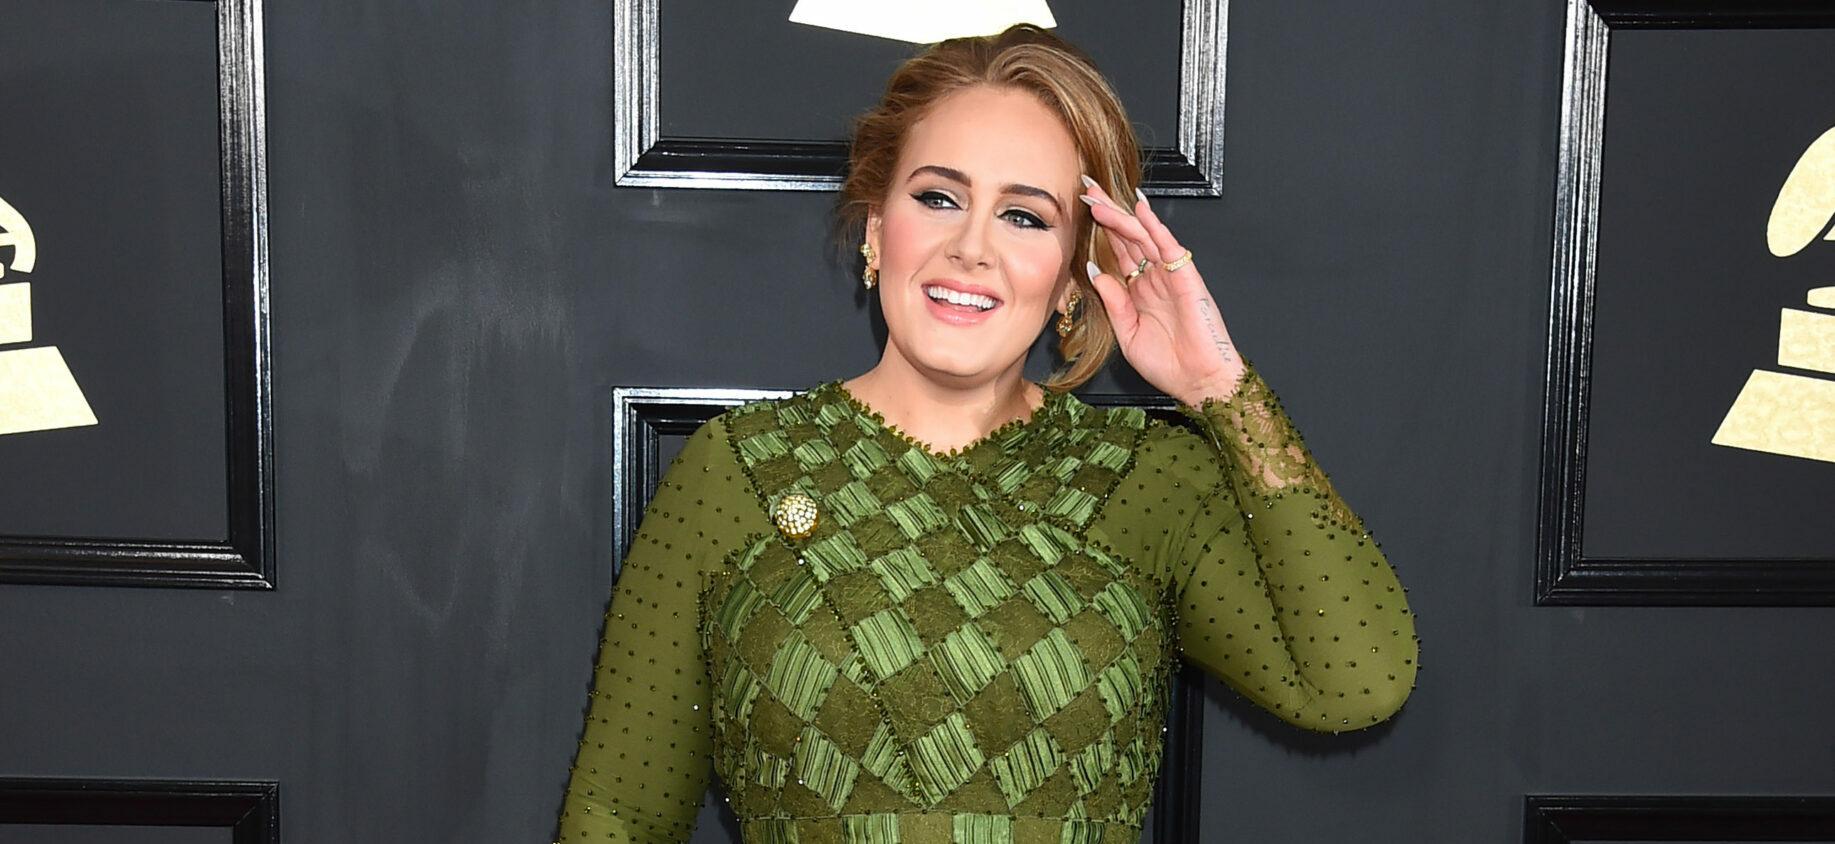 Adele looks incredible in this green dress at a red carpet event.